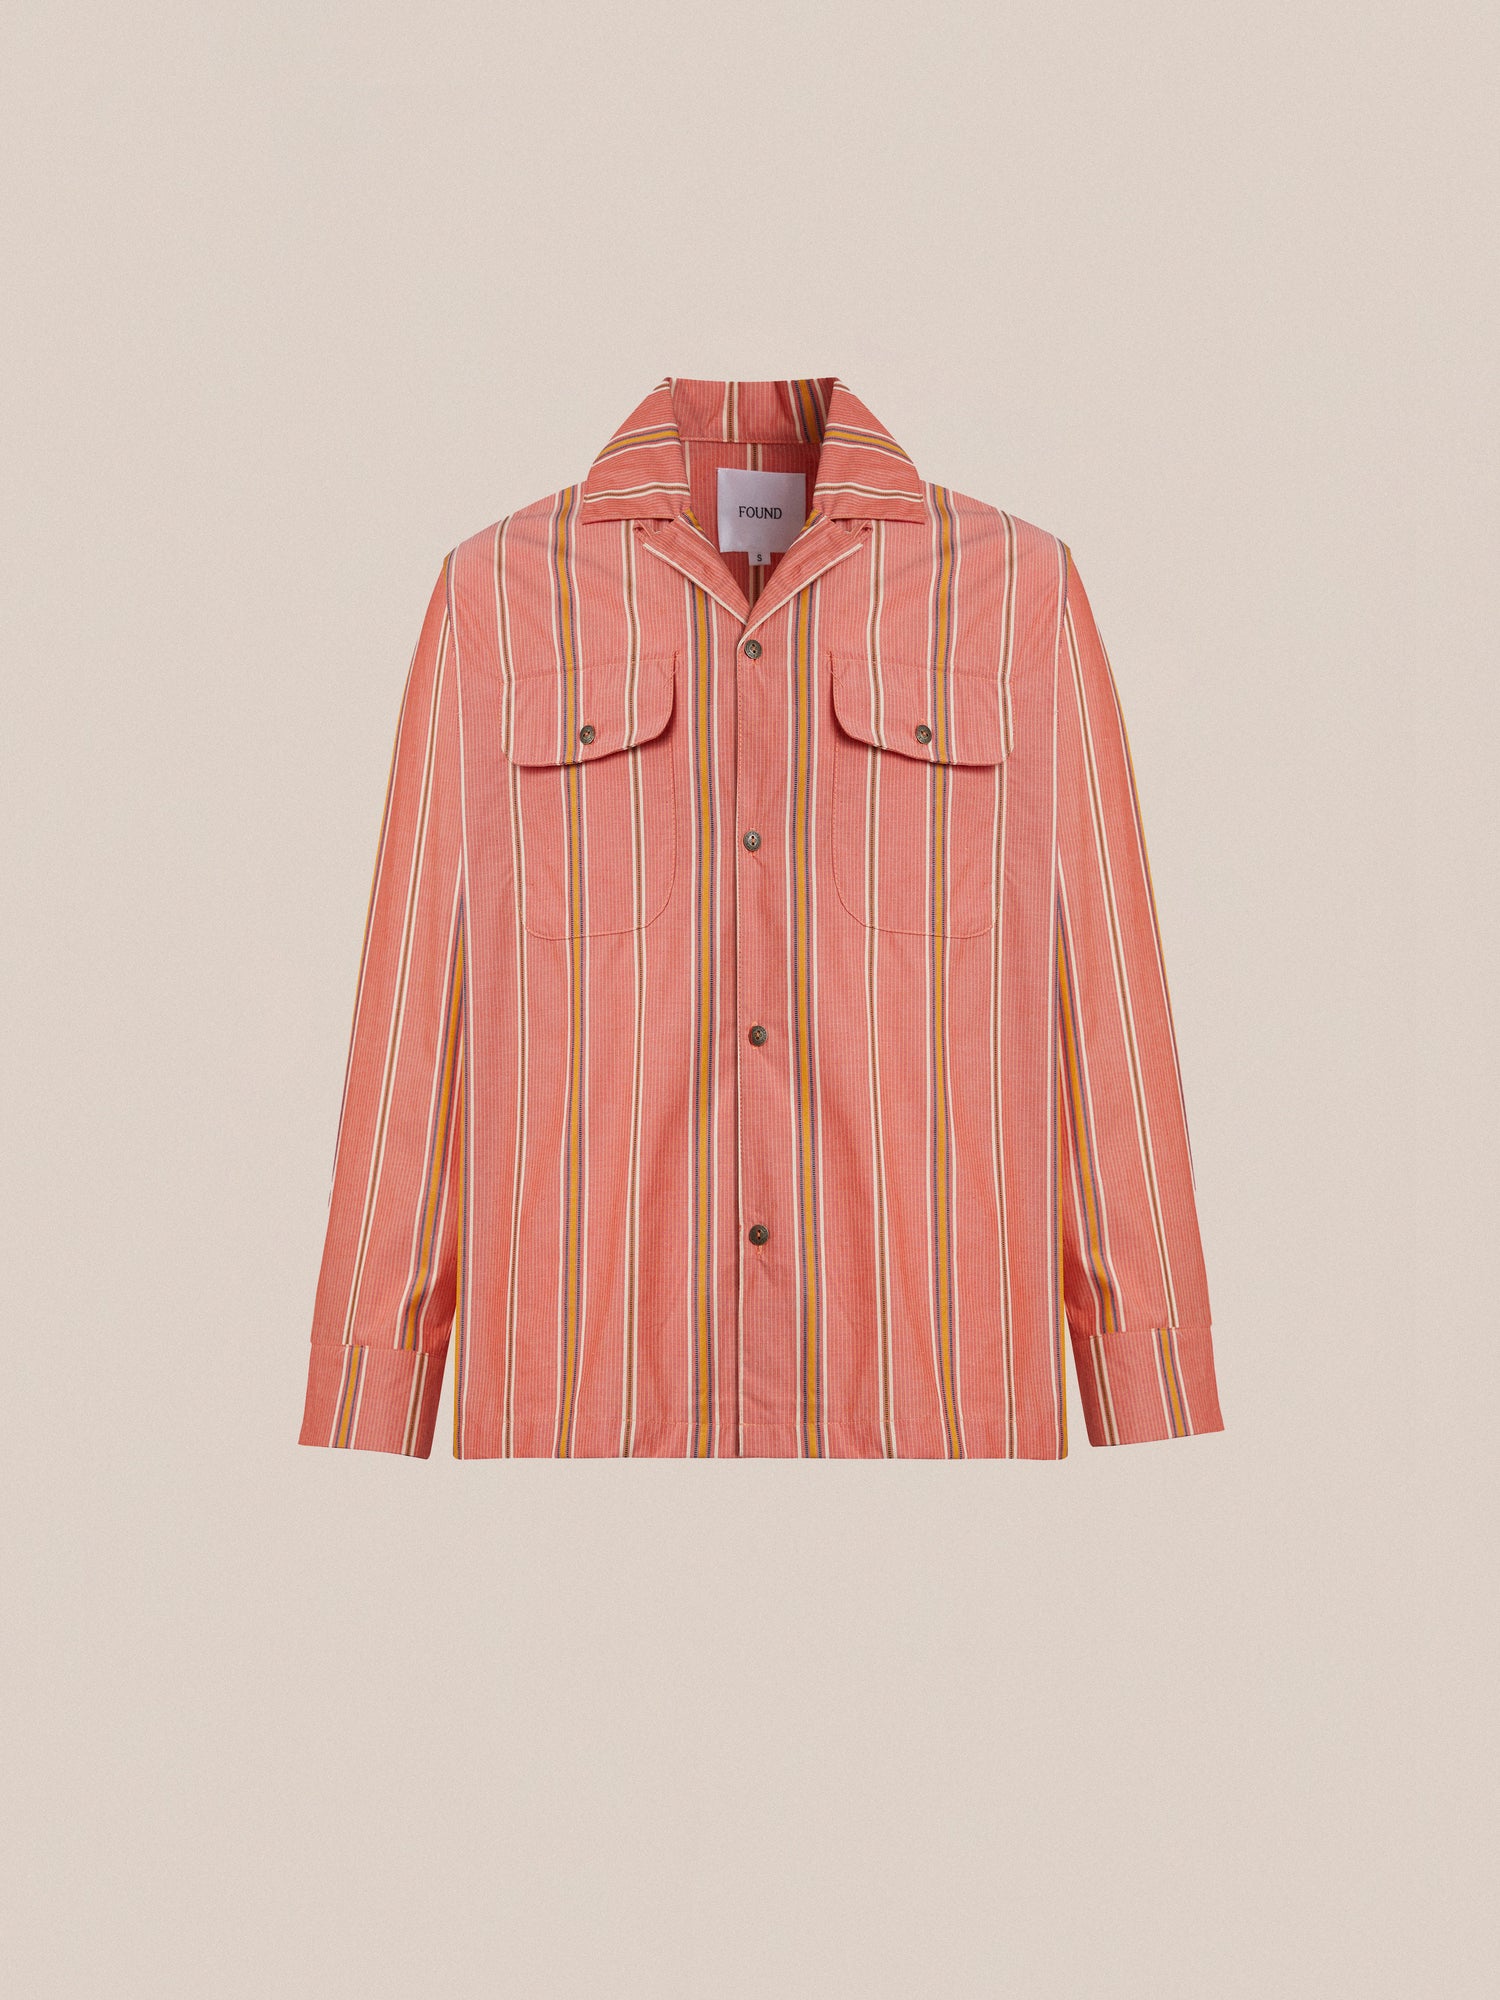 A pink, long-sleeve Stripe Citrus LS Camp shirt with a striped pattern by Found.